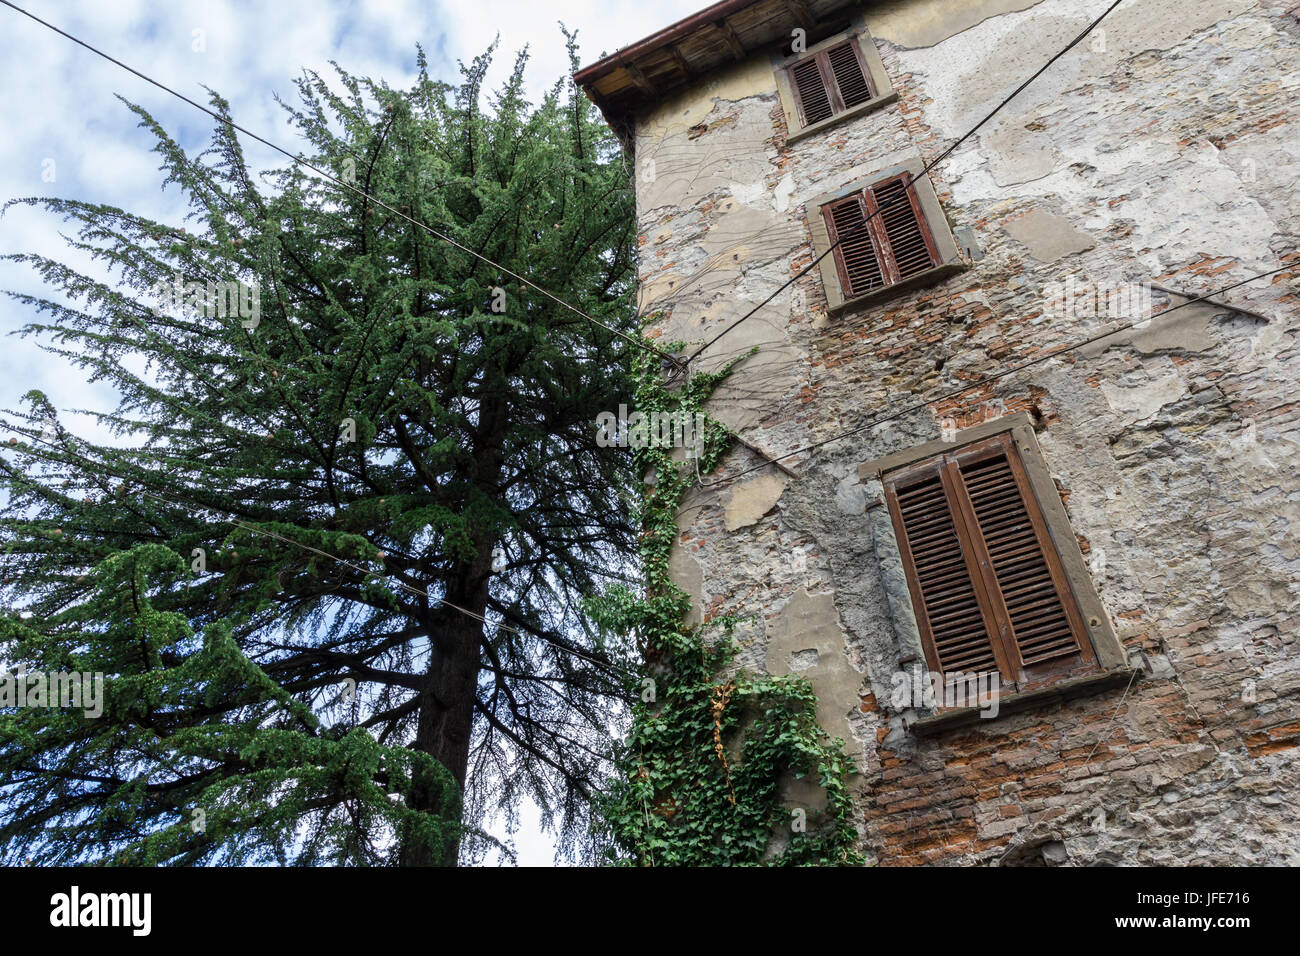 Ancient house with tree Stock Photo